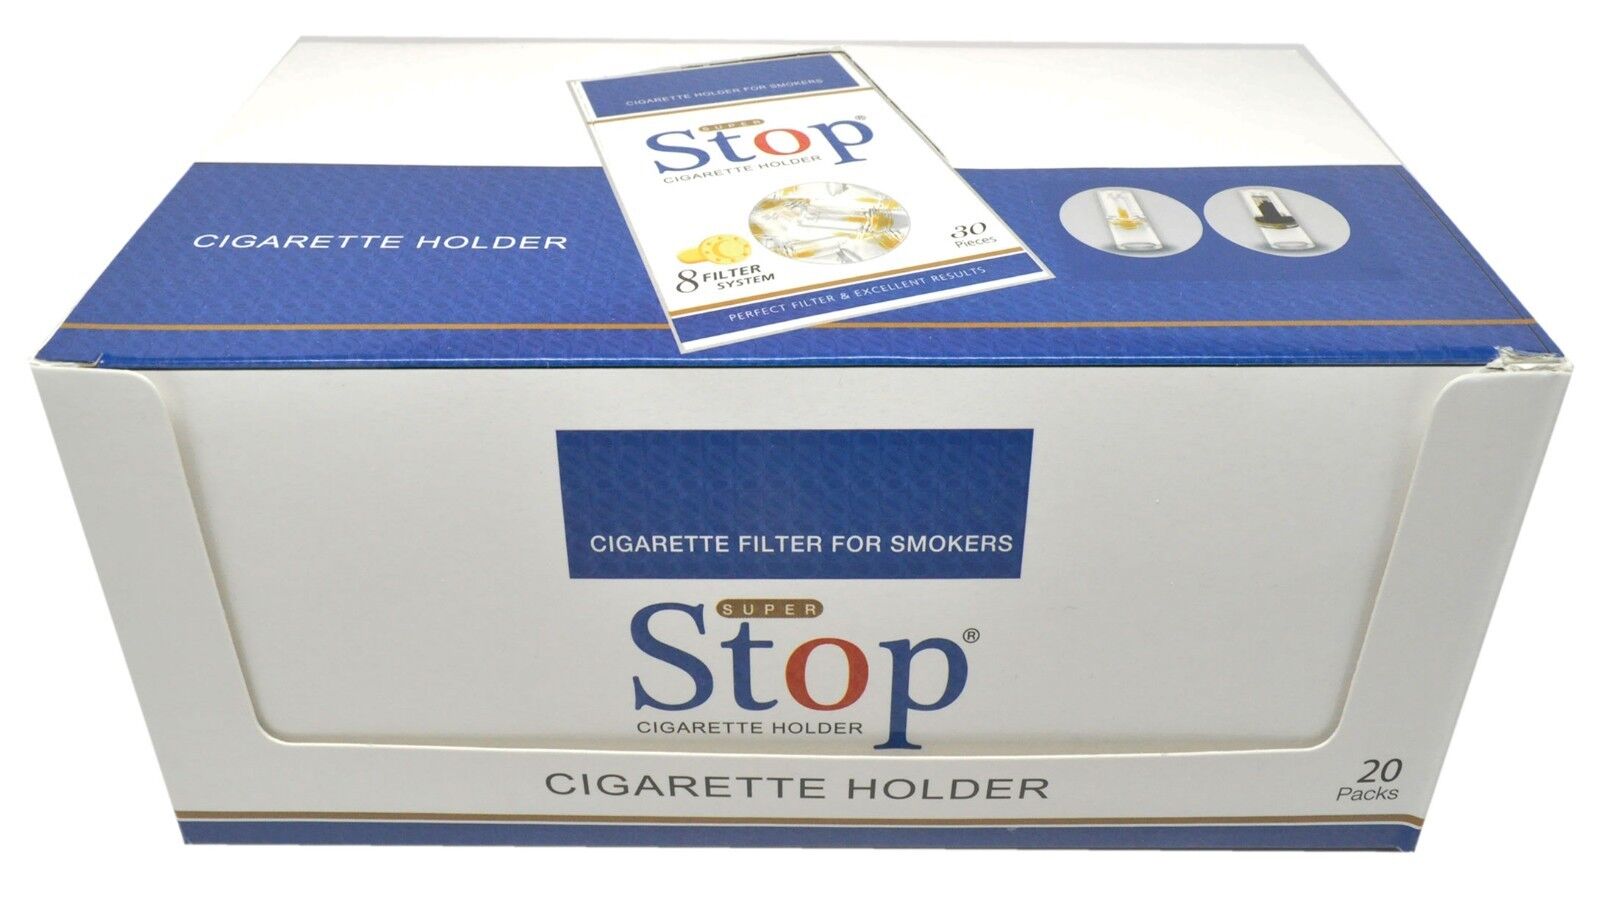 New 8-hole Super Stop Cigarette Filters 20 packs 600 filters Cut the Tar and Nic